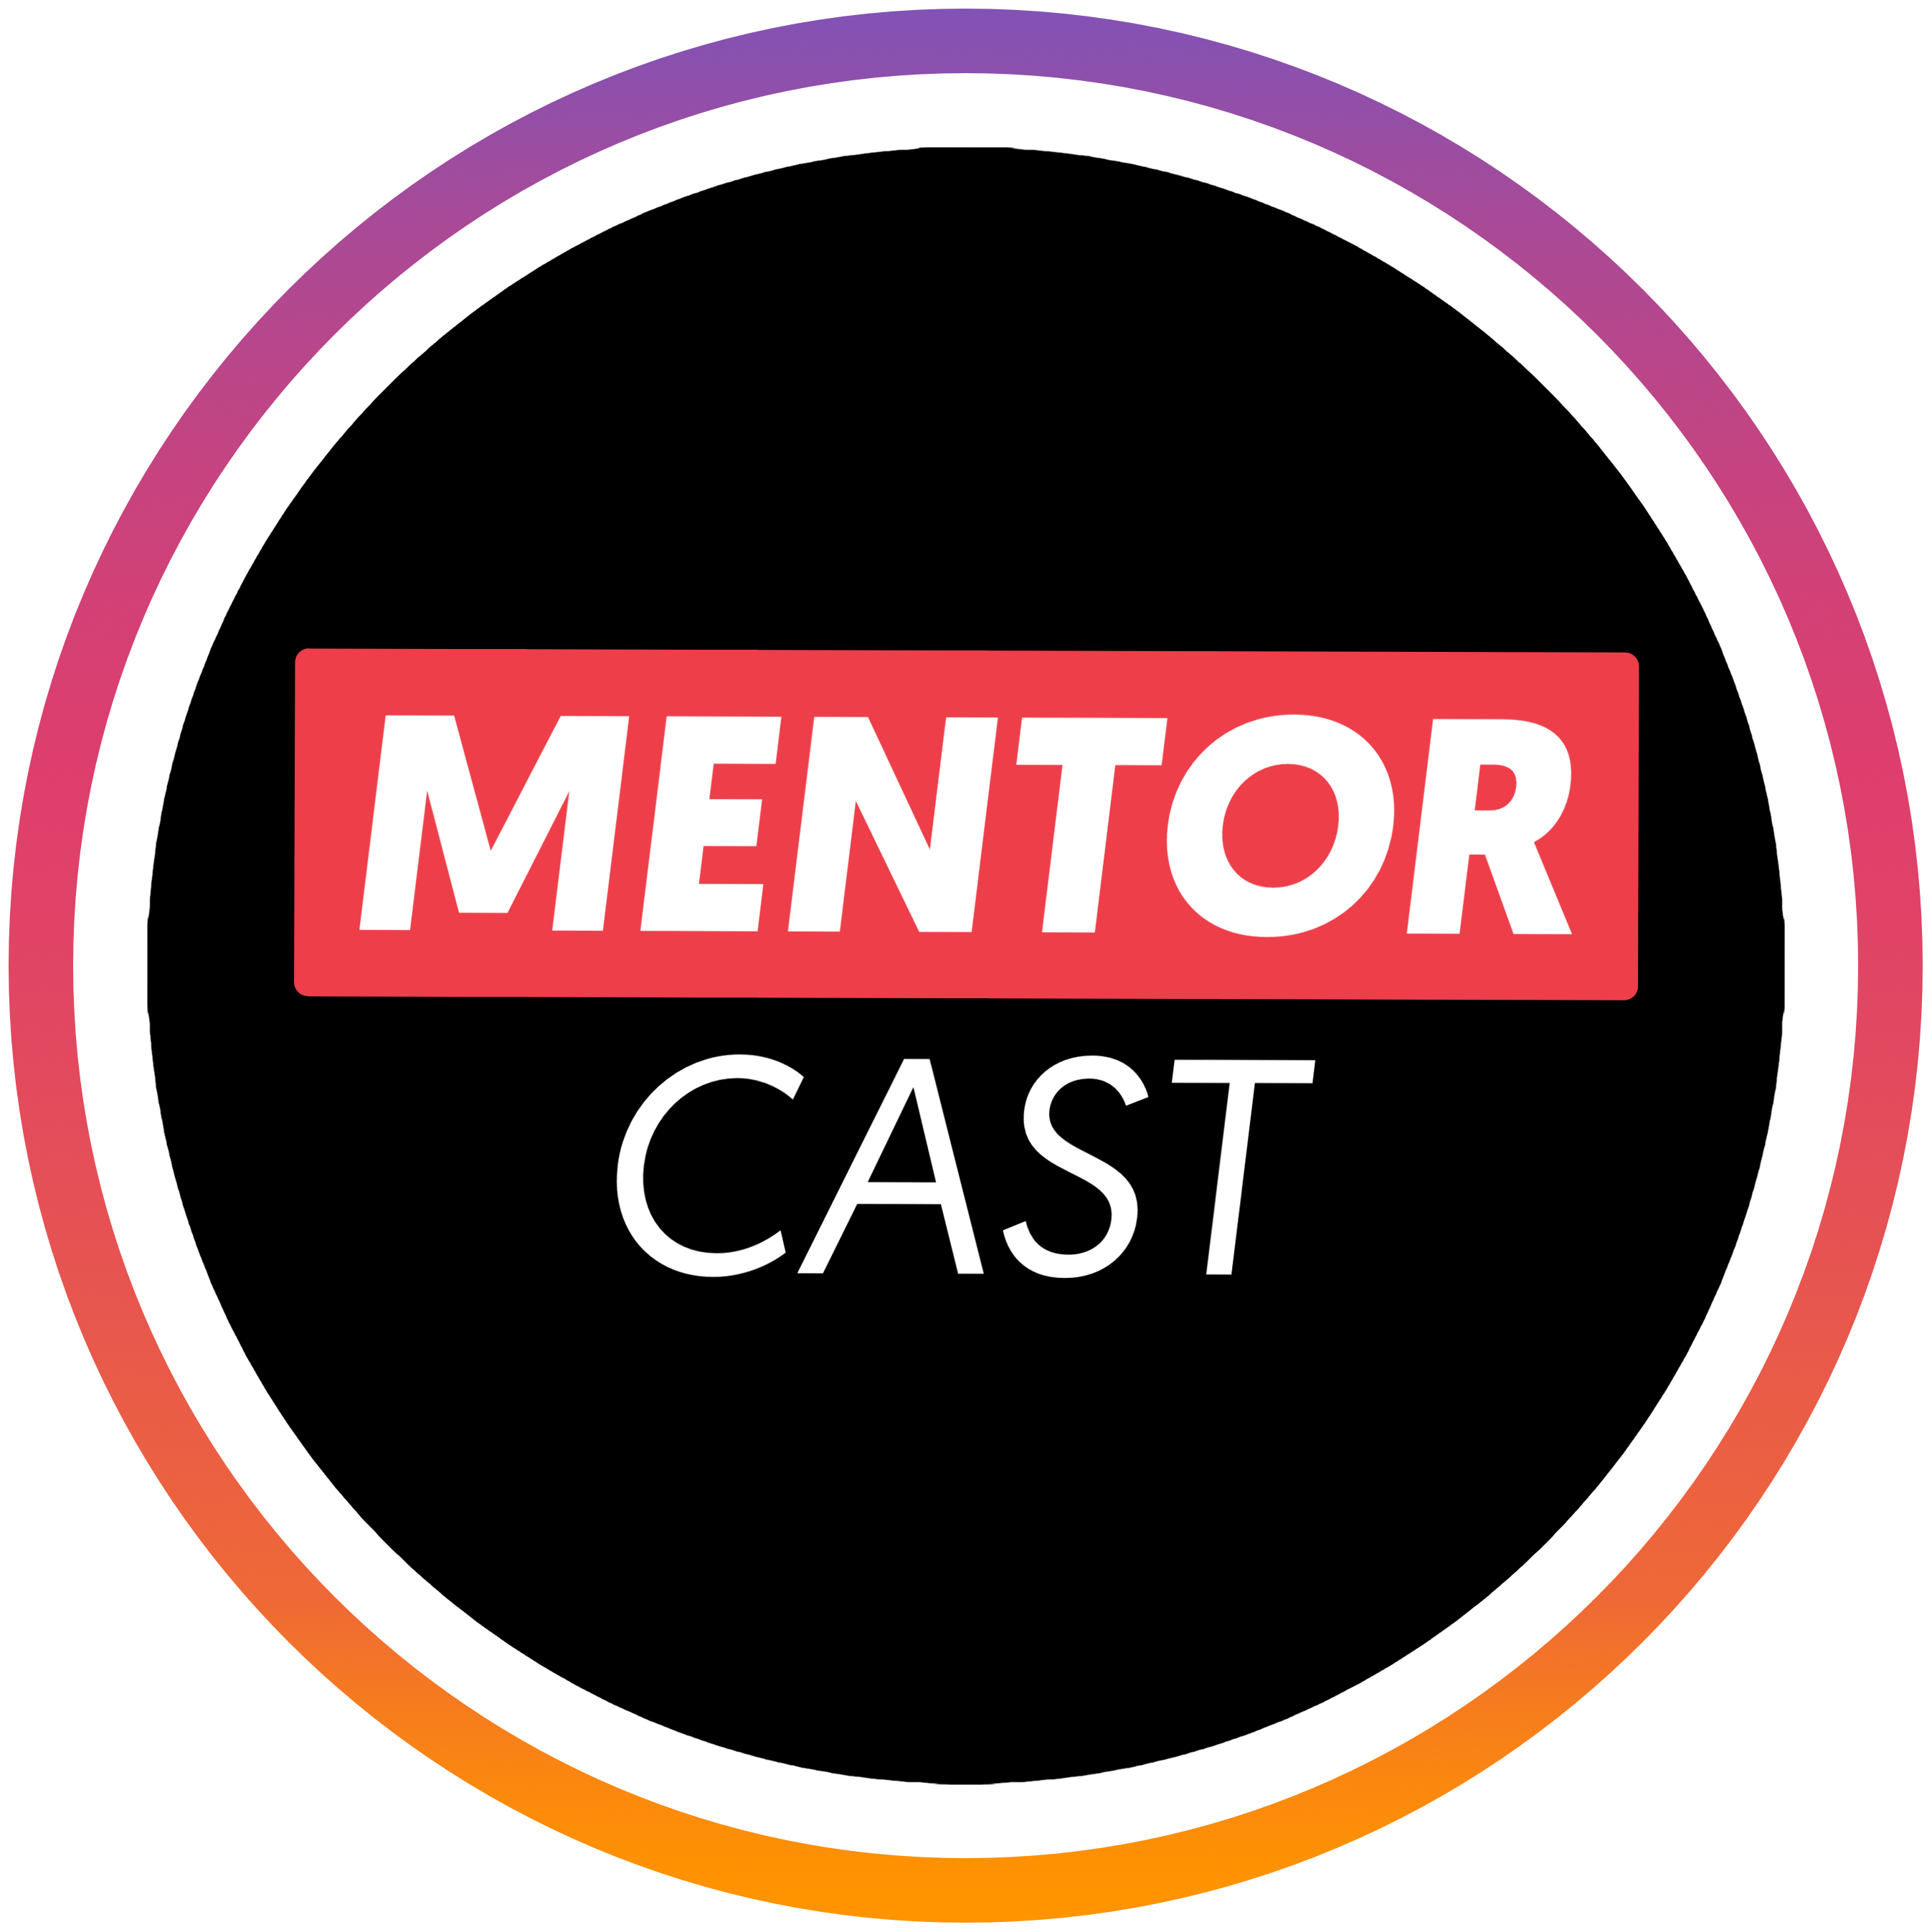 Podcast Mentorcast - upgrade your mind